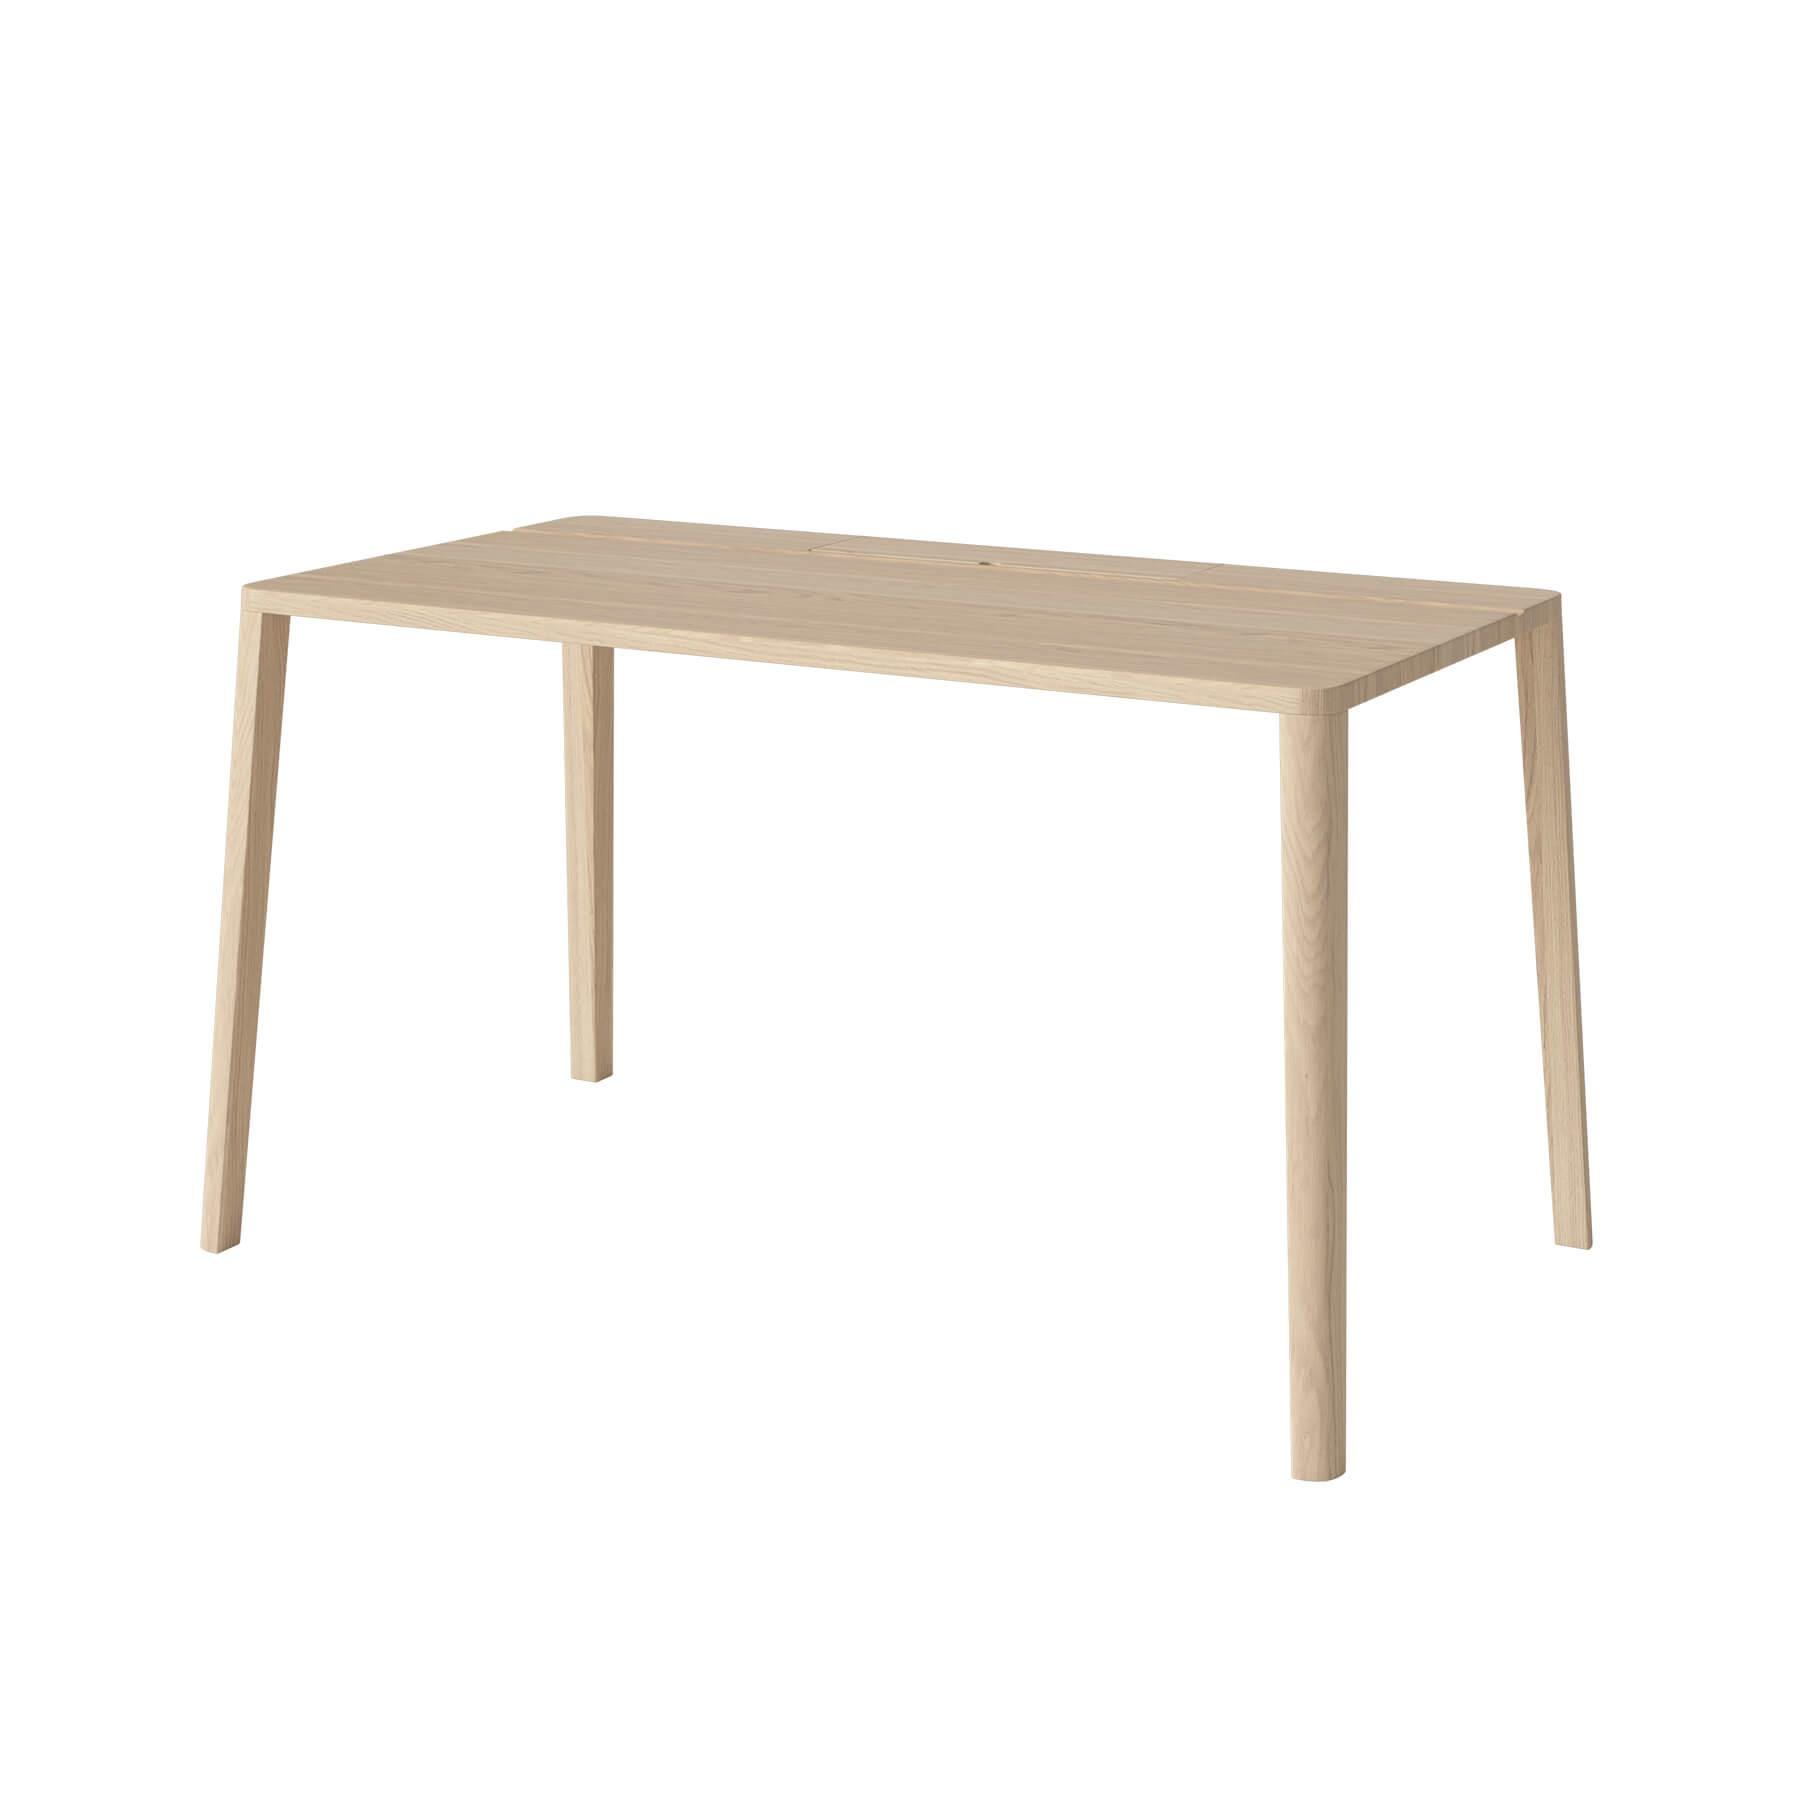 Bolia Graceful Desk White Pigmented Oil Small Light Wood Designer Furniture From Holloways Of Ludlow